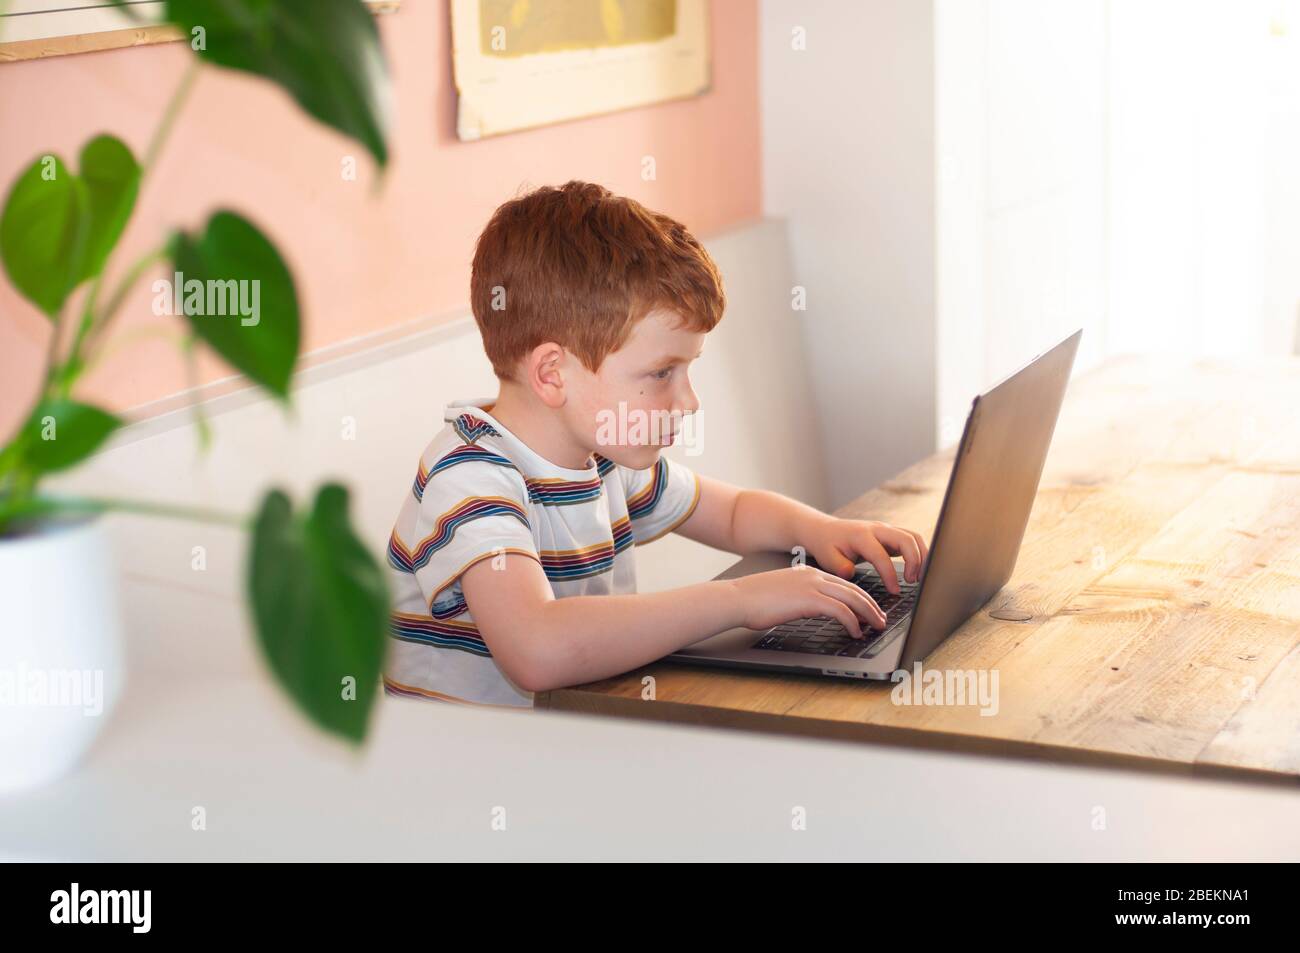 Pre-teen boy focusing on his school work at the computer during homeschooling due to the coronavirus lockdown Stock Photo